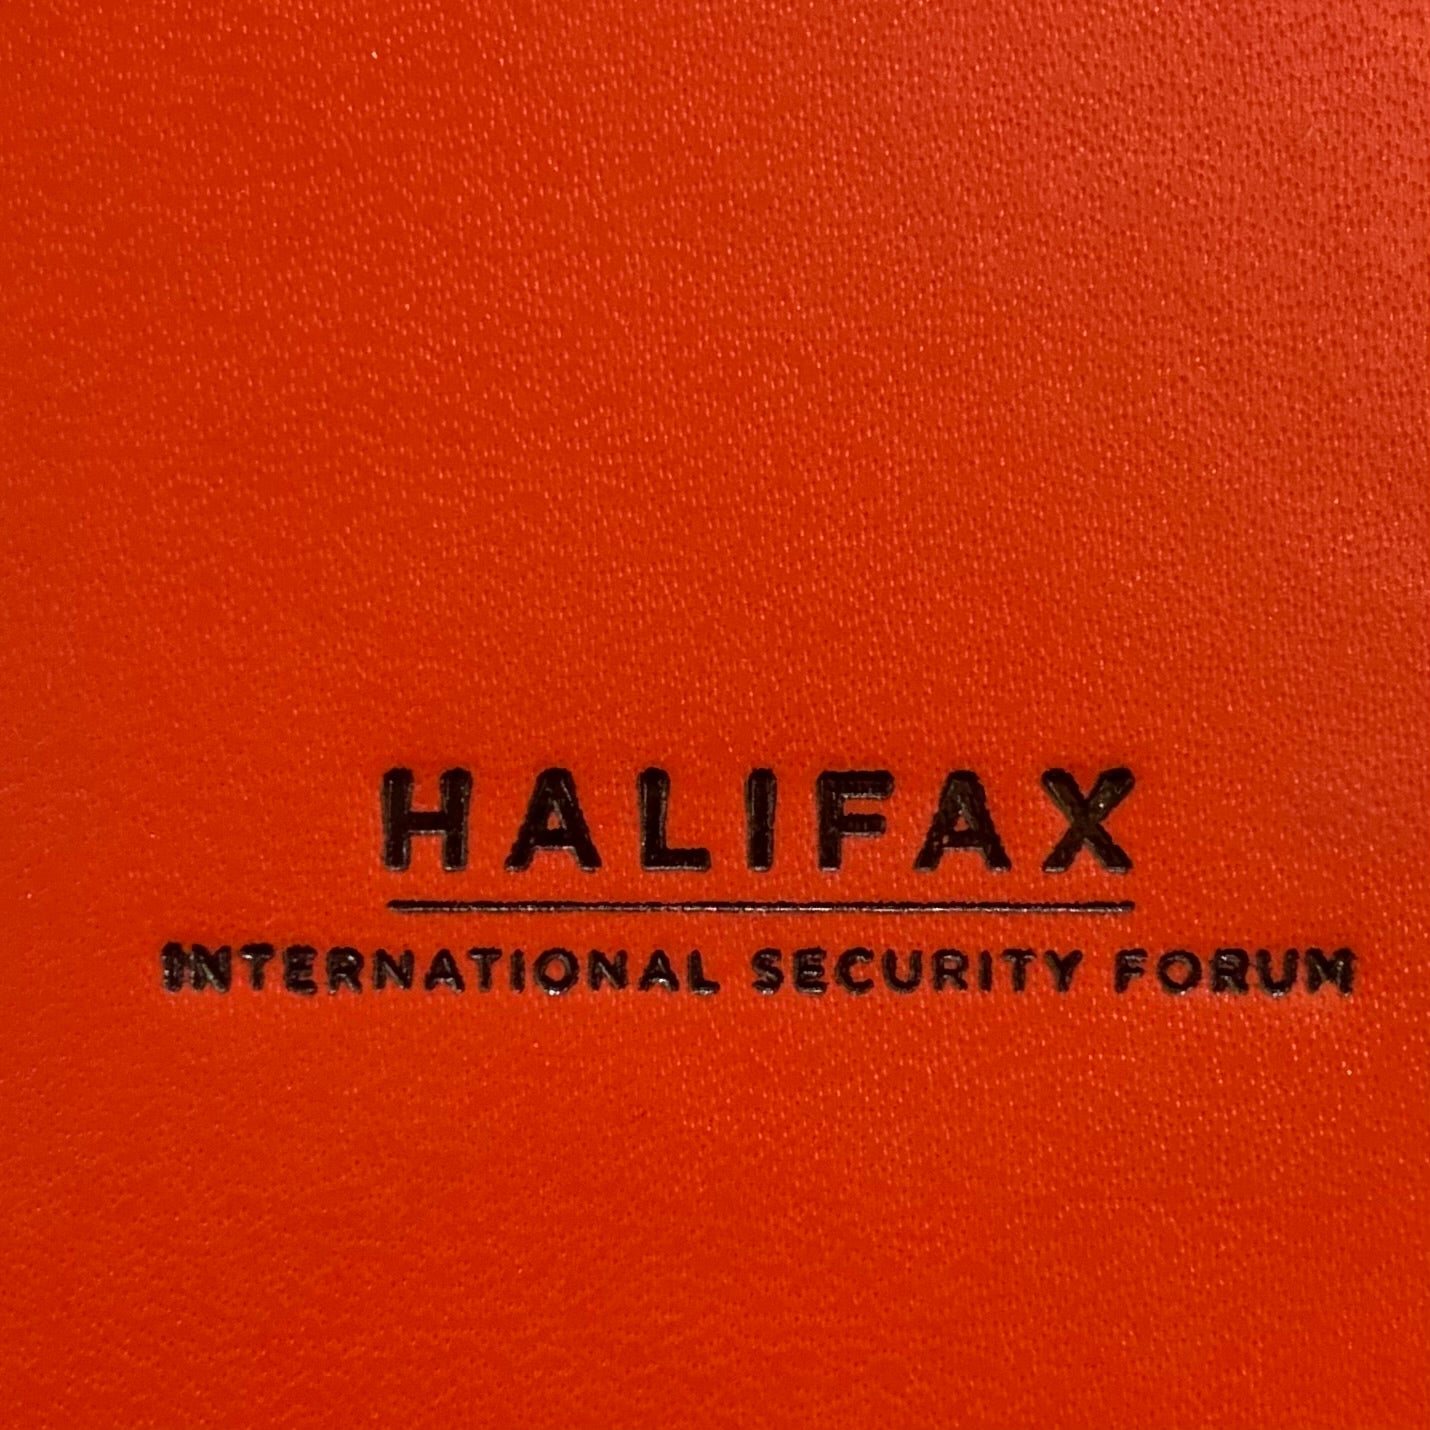 HALIFAX | Production of Magnesium Die | Reproduction of Logo